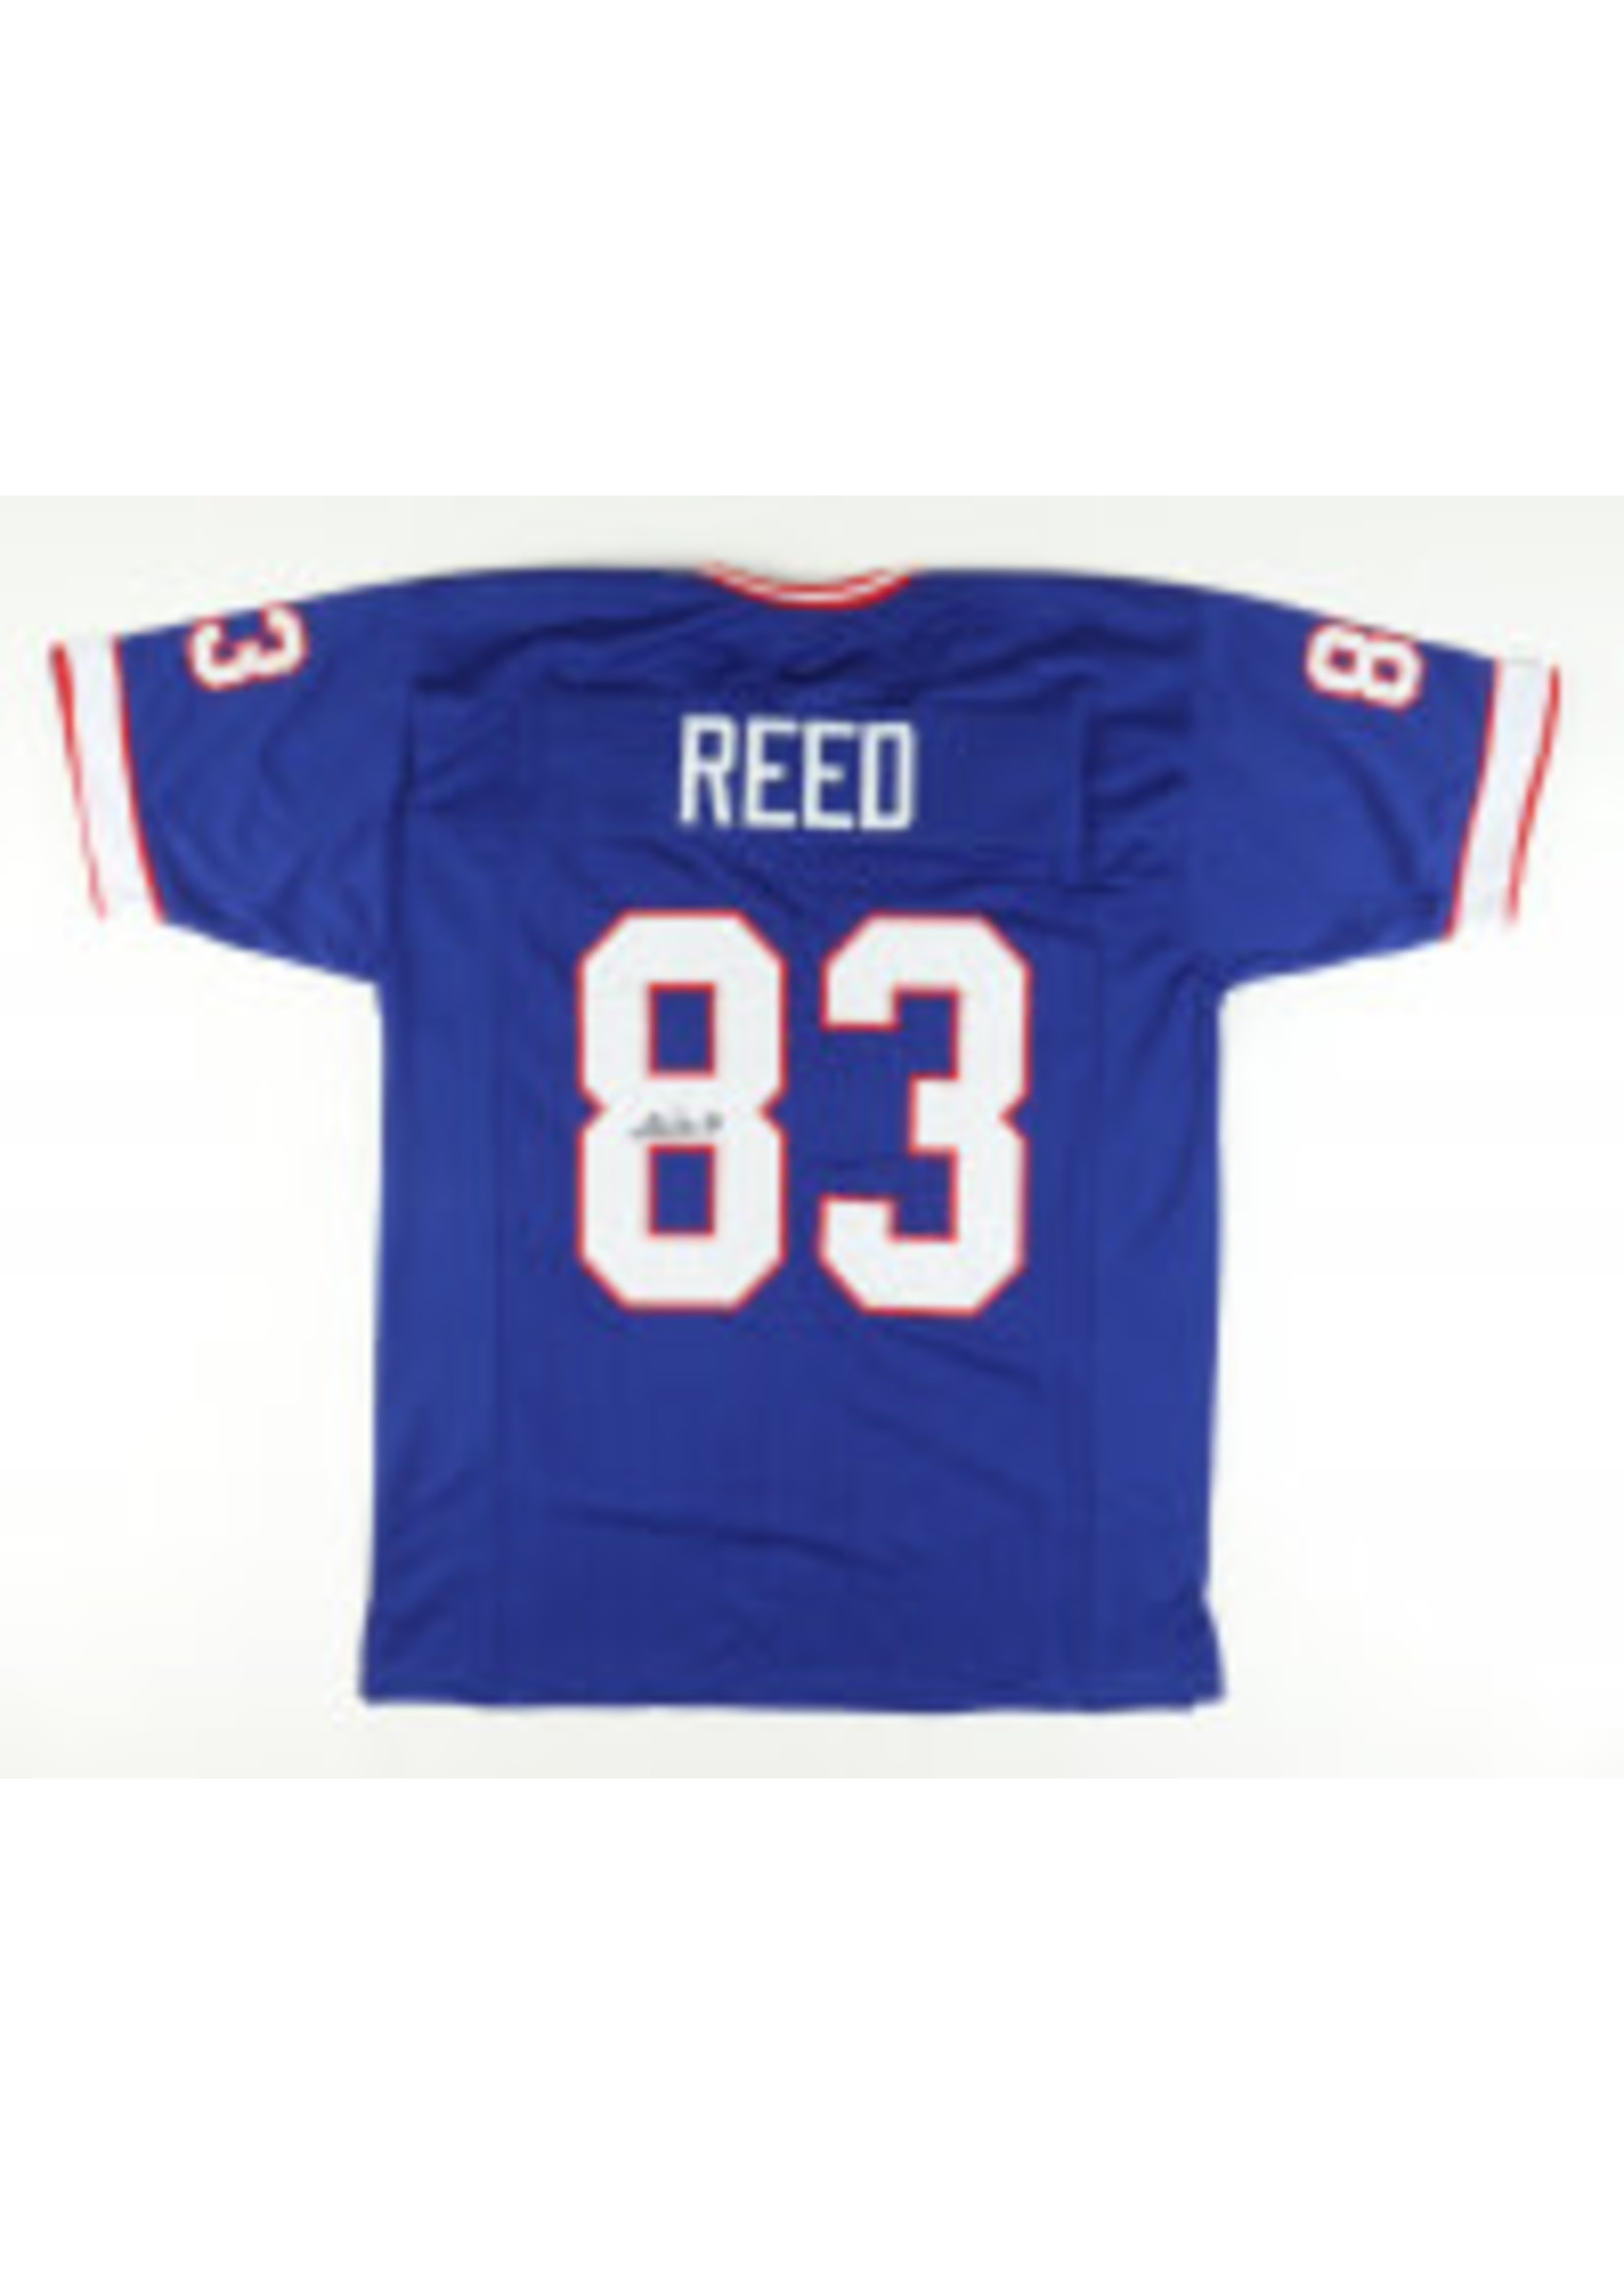 Andre Reed Jersey